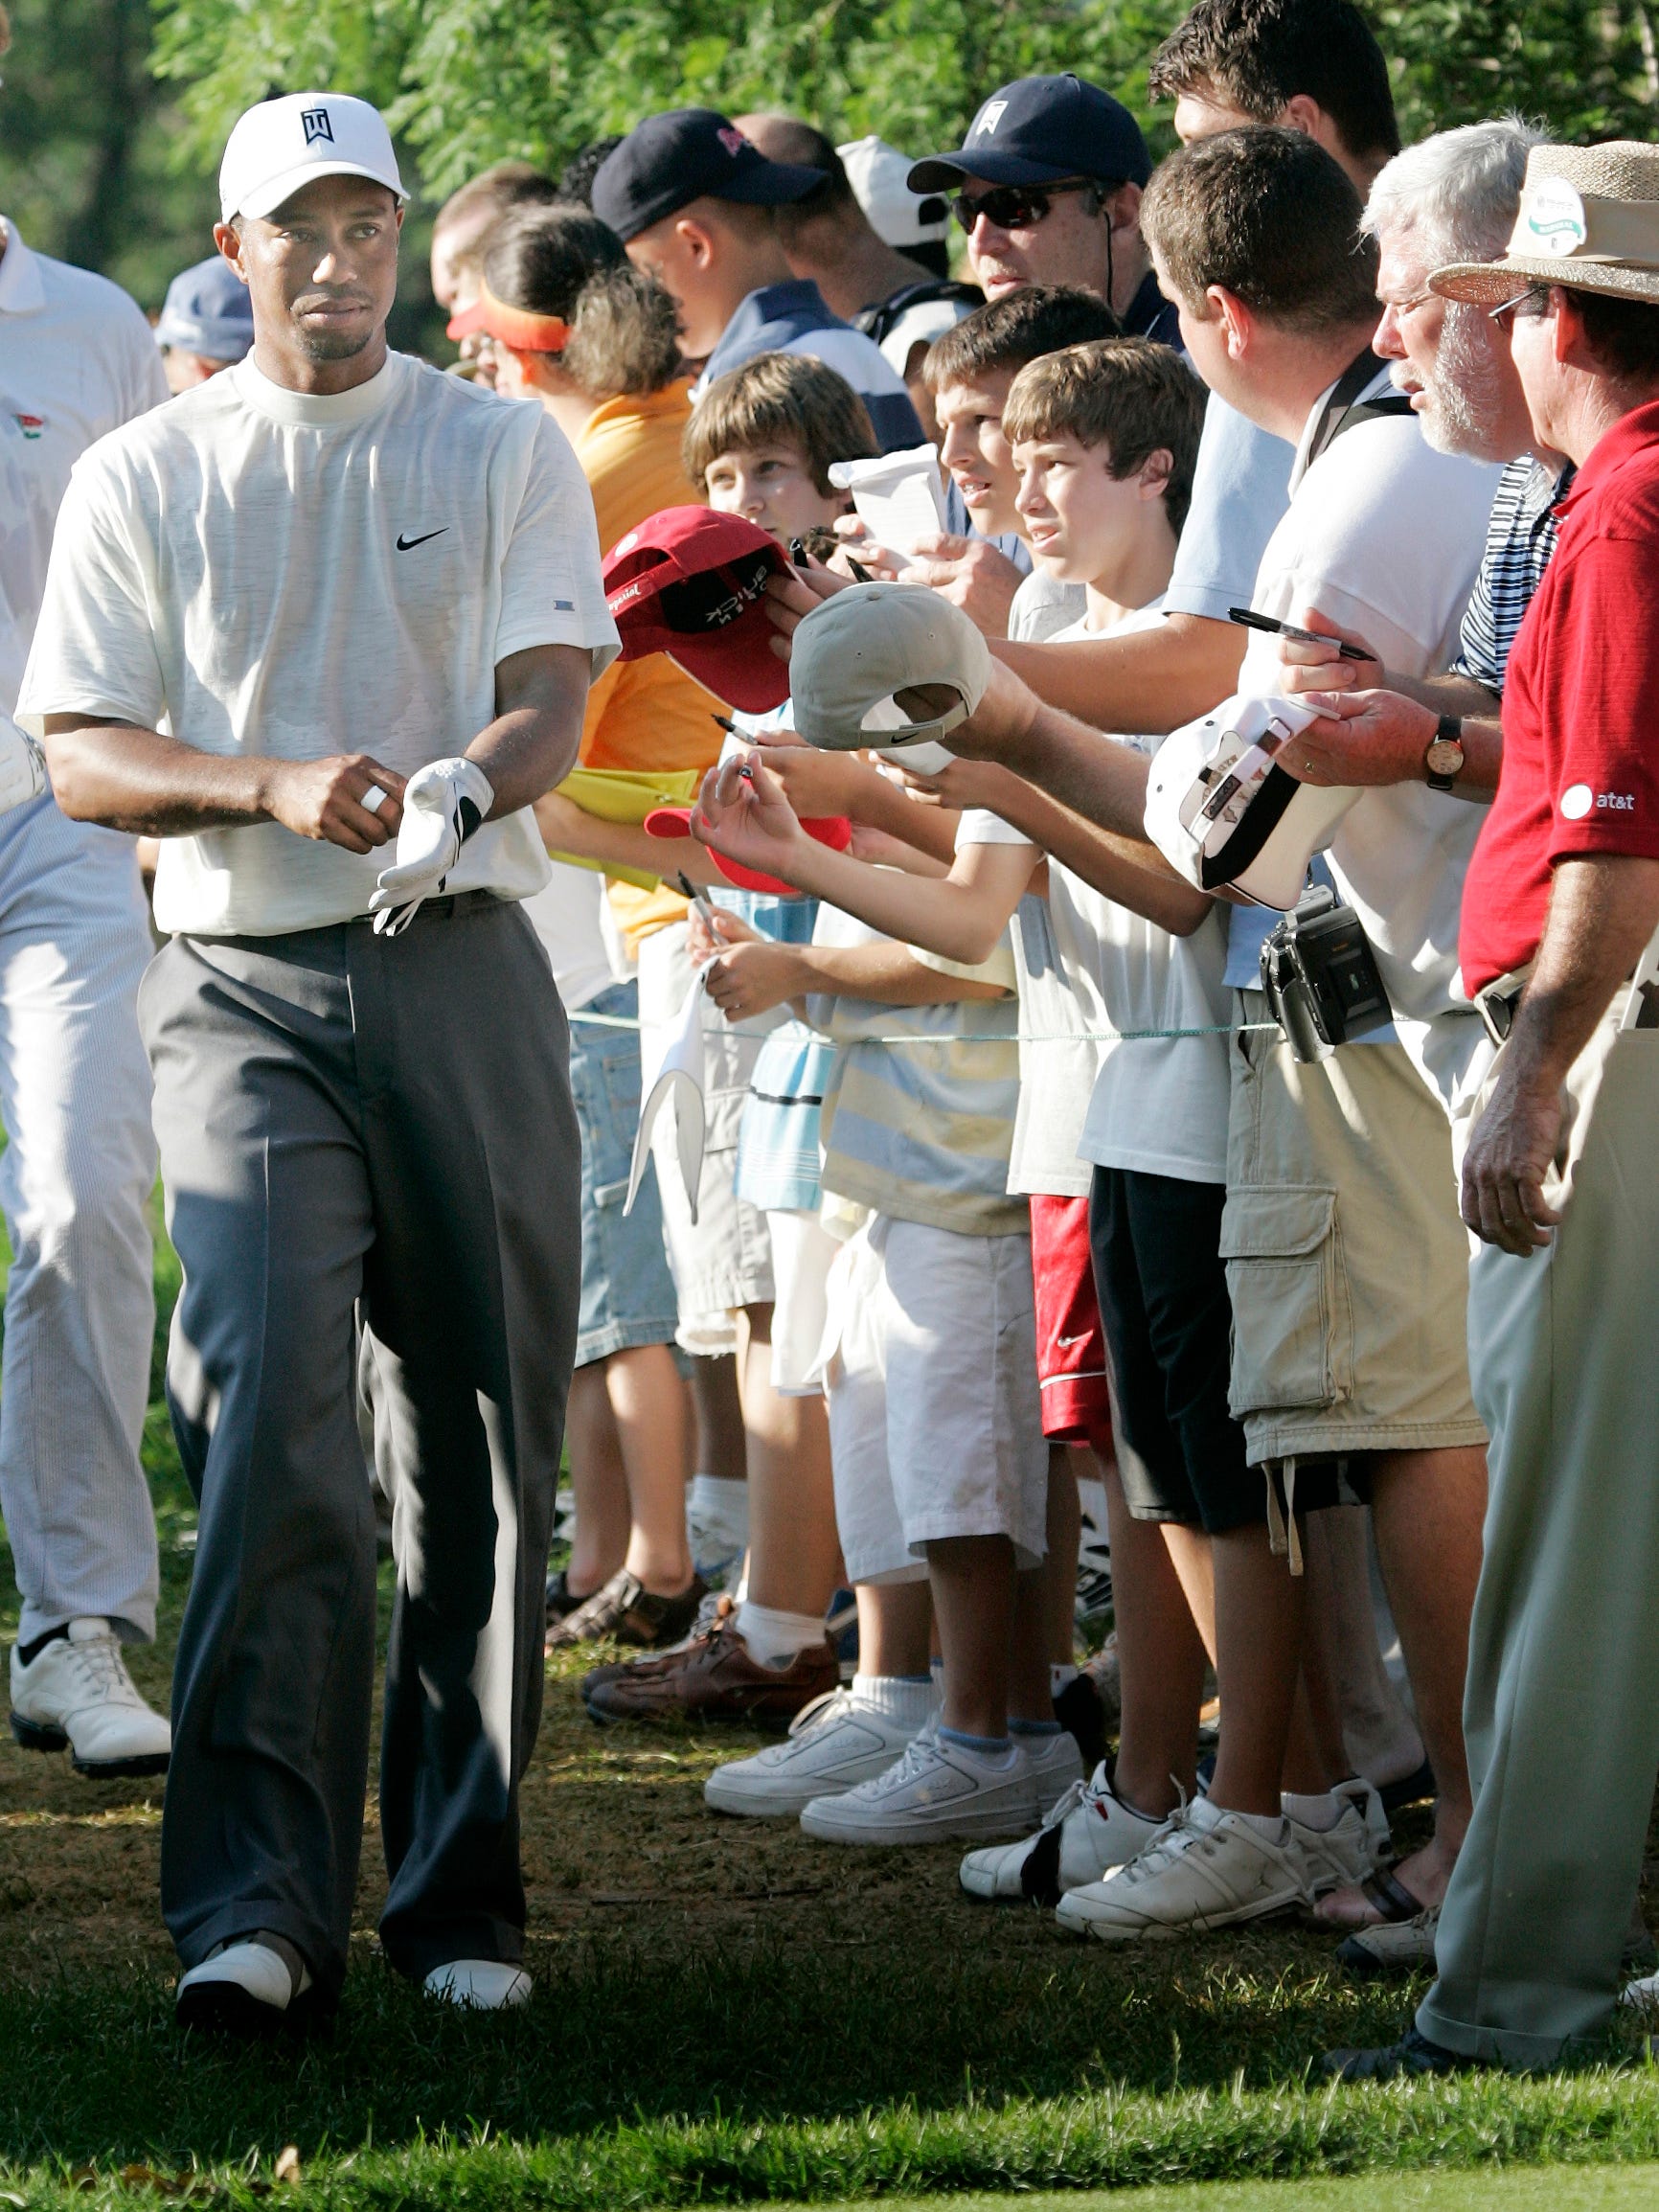 Tiger Woods walks through the gauntlet of autograph-seekers at the Buick Open pro-am in 2006.